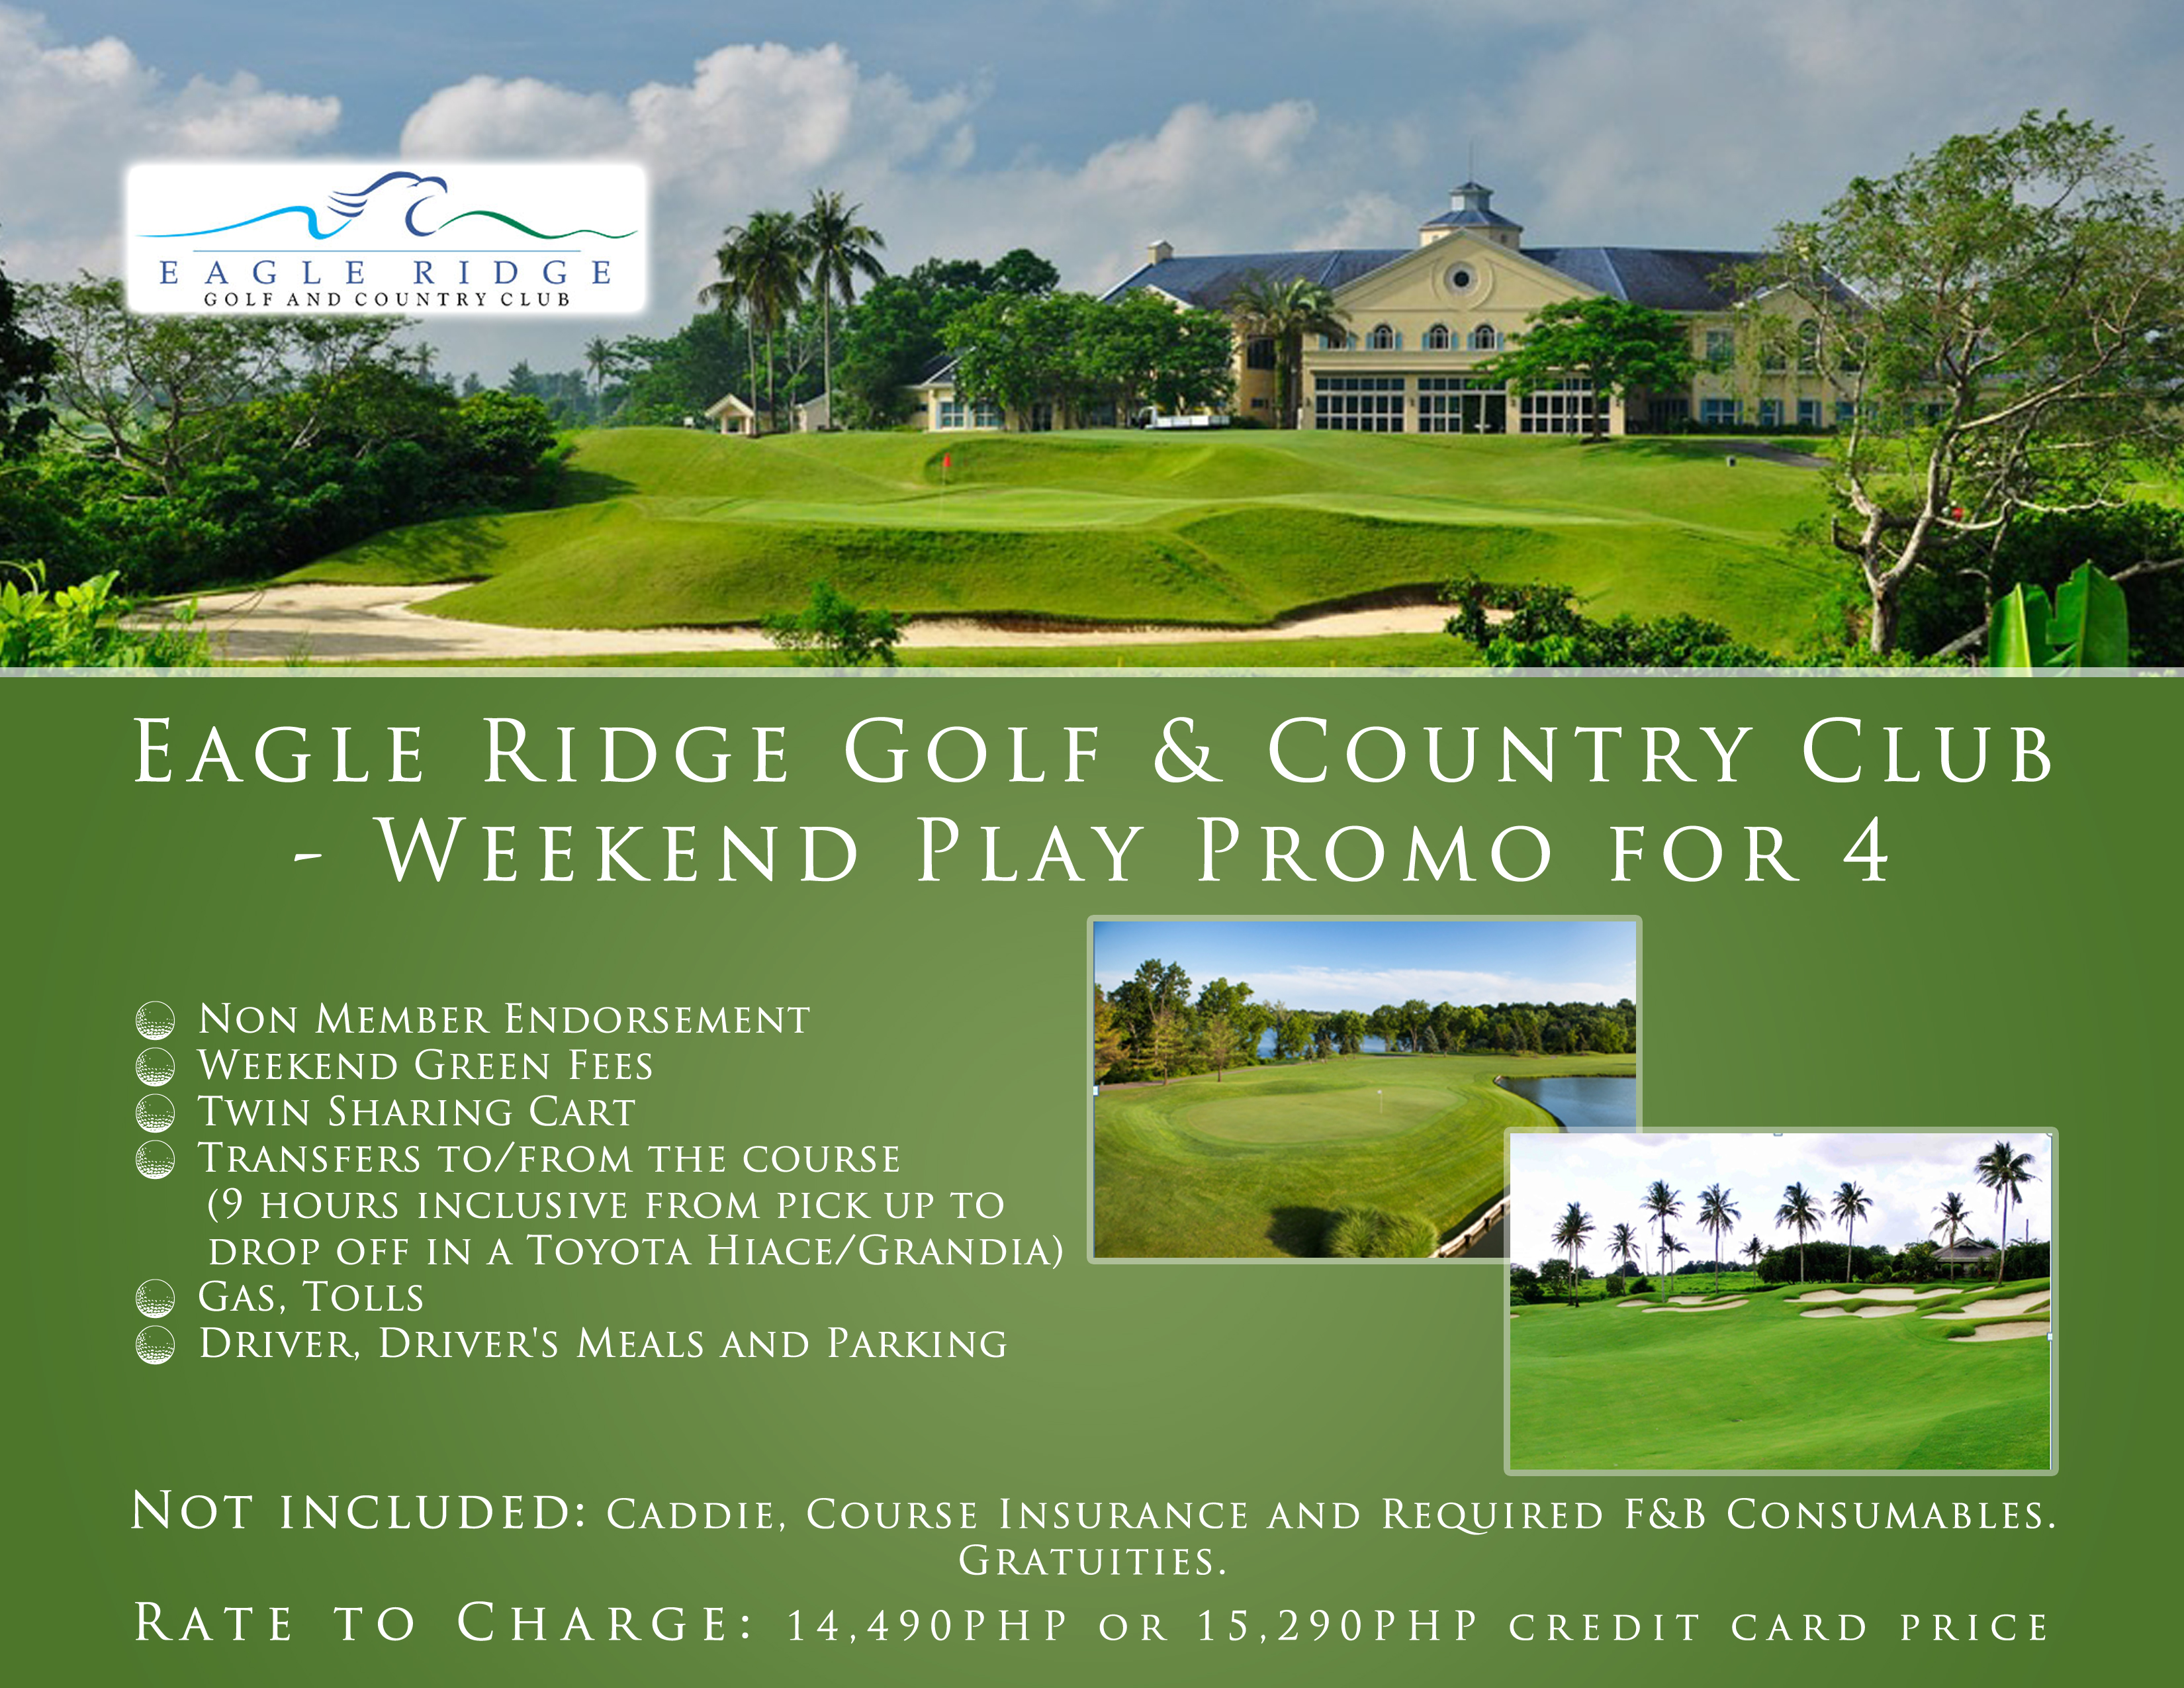 Offer #8 - Eagle Ridge Golf & Country Club - Weekend Play Promo for 4